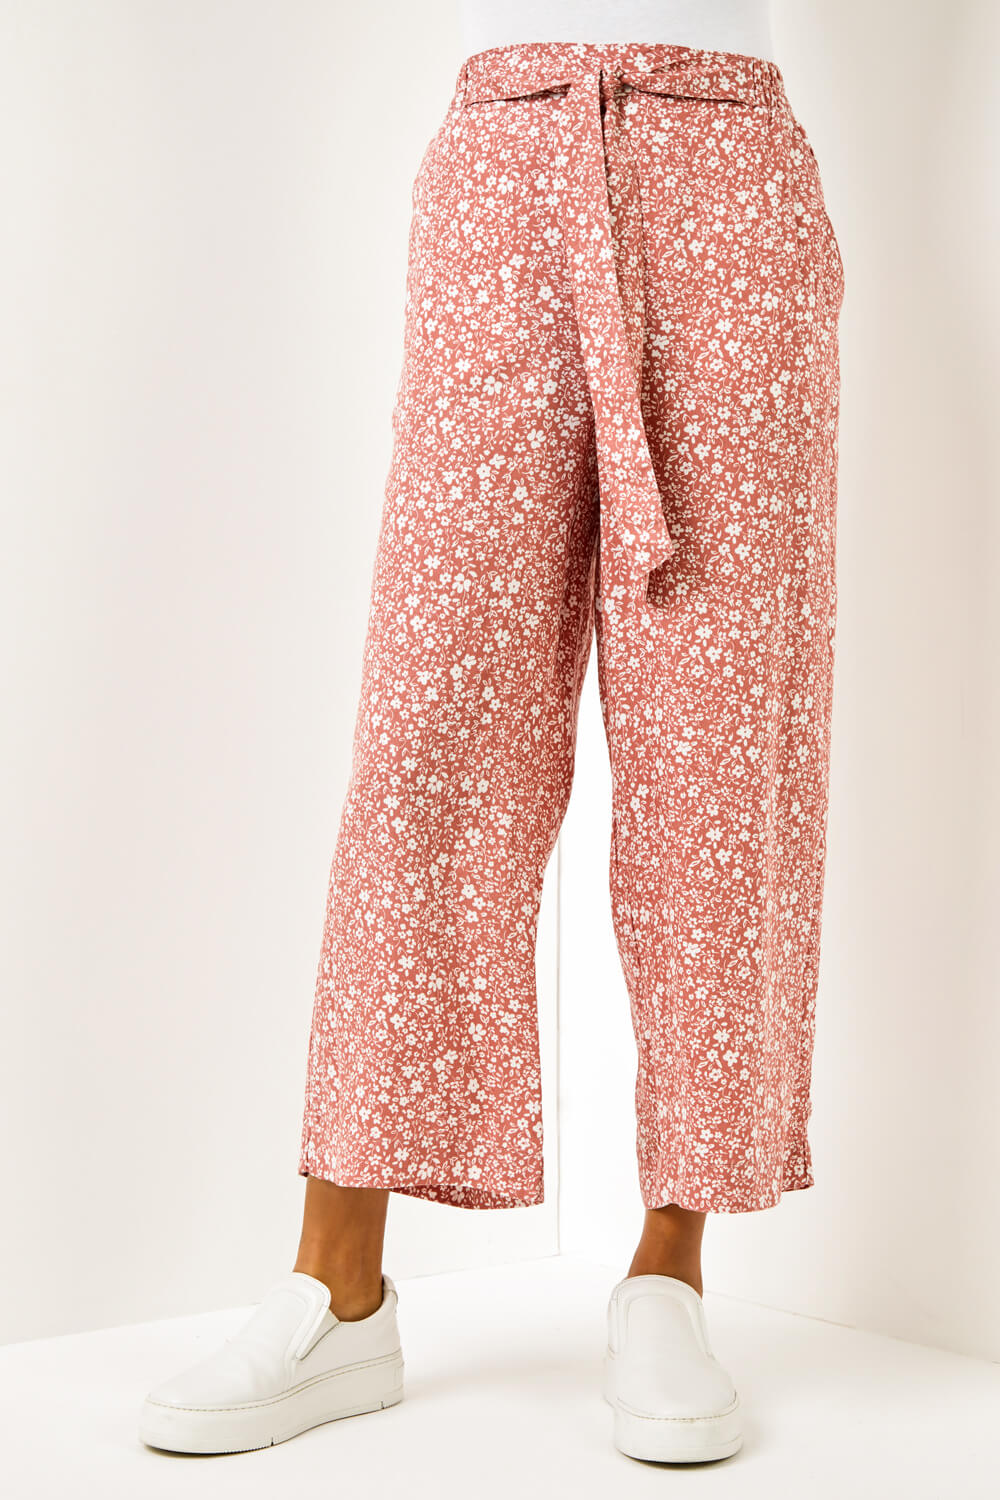 Rust Ditsy Floral Elastic Tie Waist Cropped Culottes, Image 4 of 5